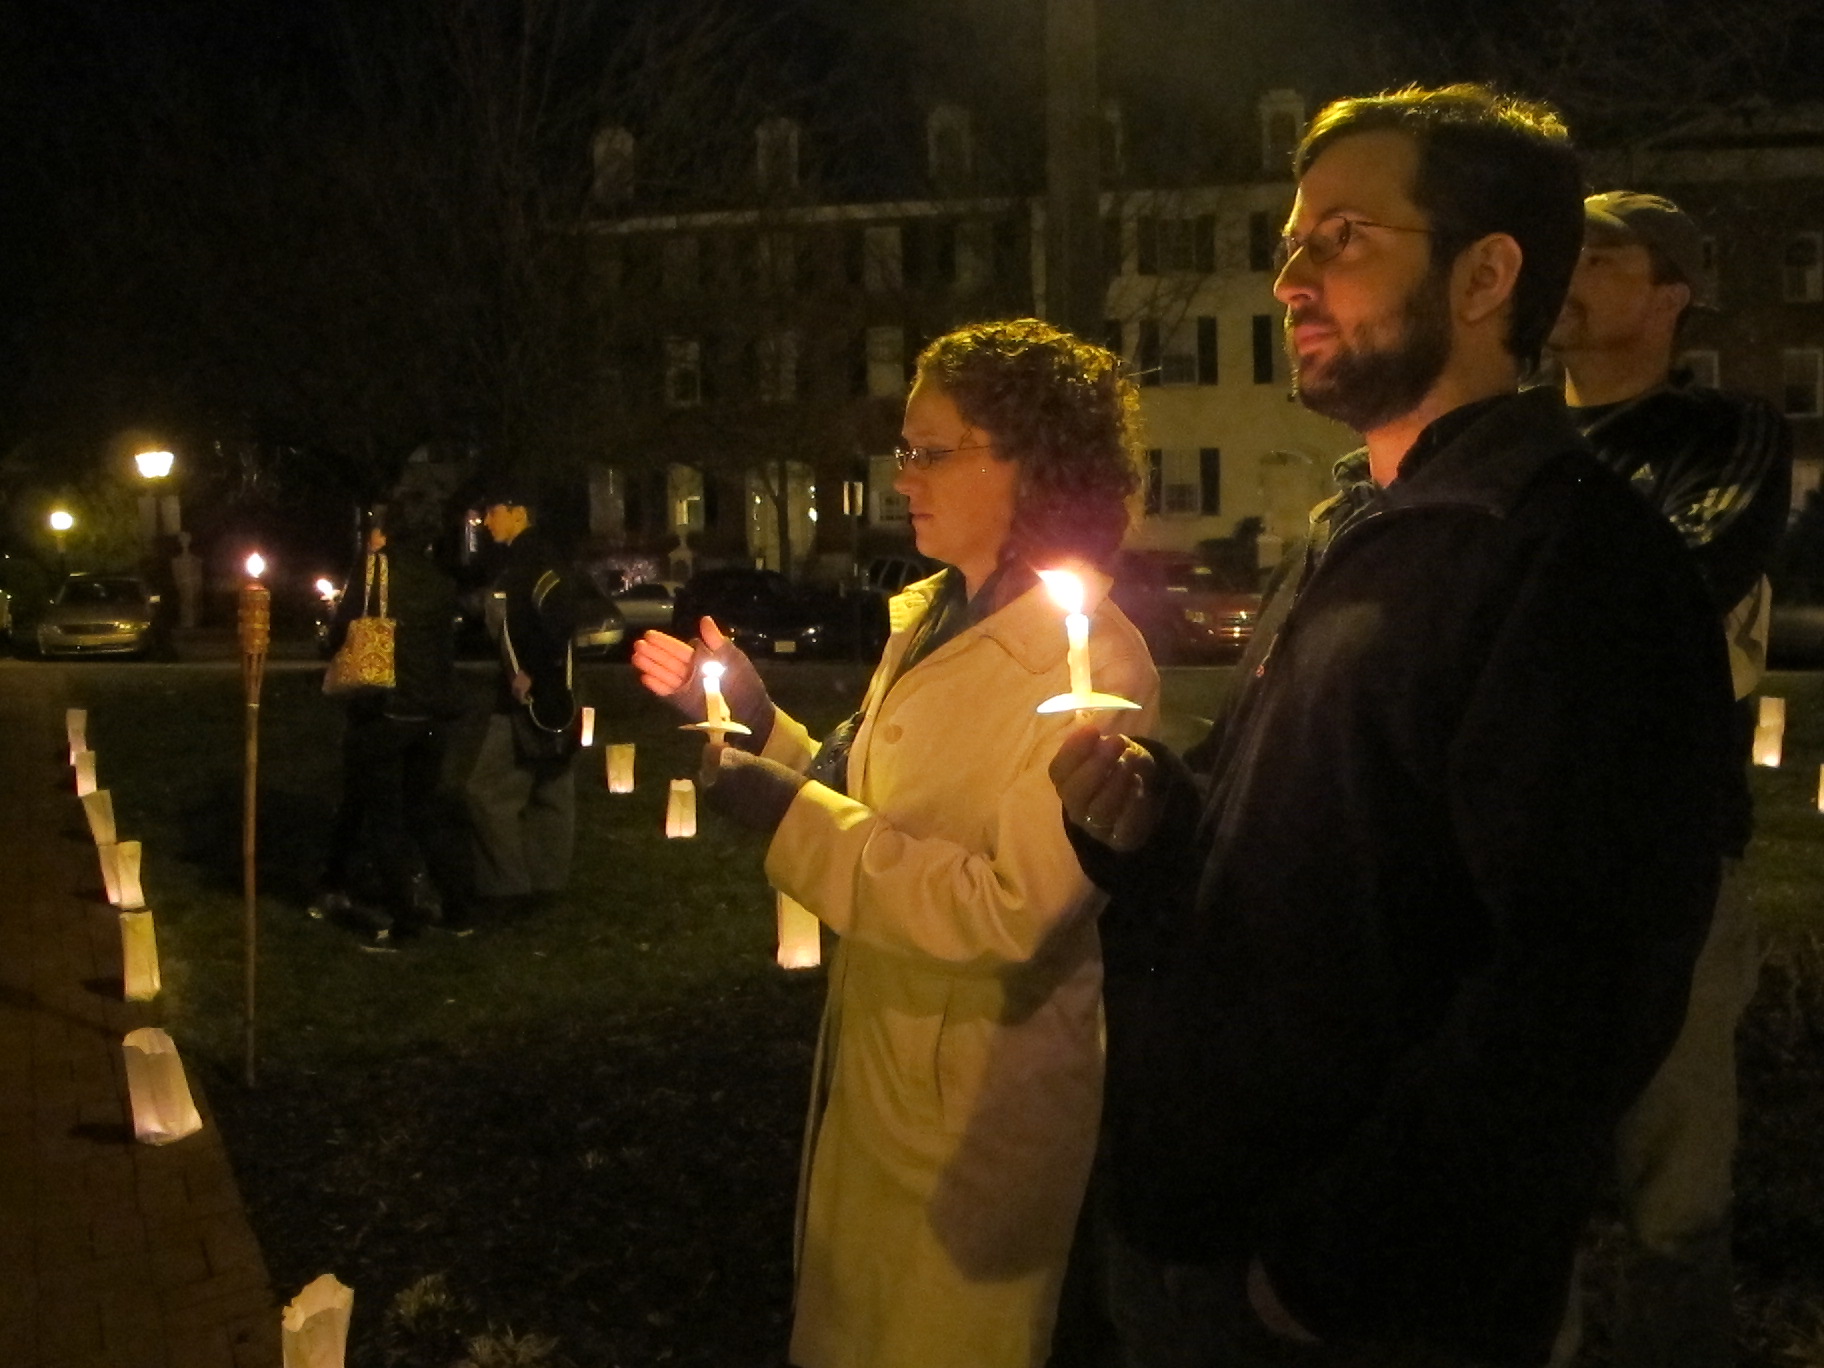 A twentysomething couple holds candles at the Illumination in Frederick.